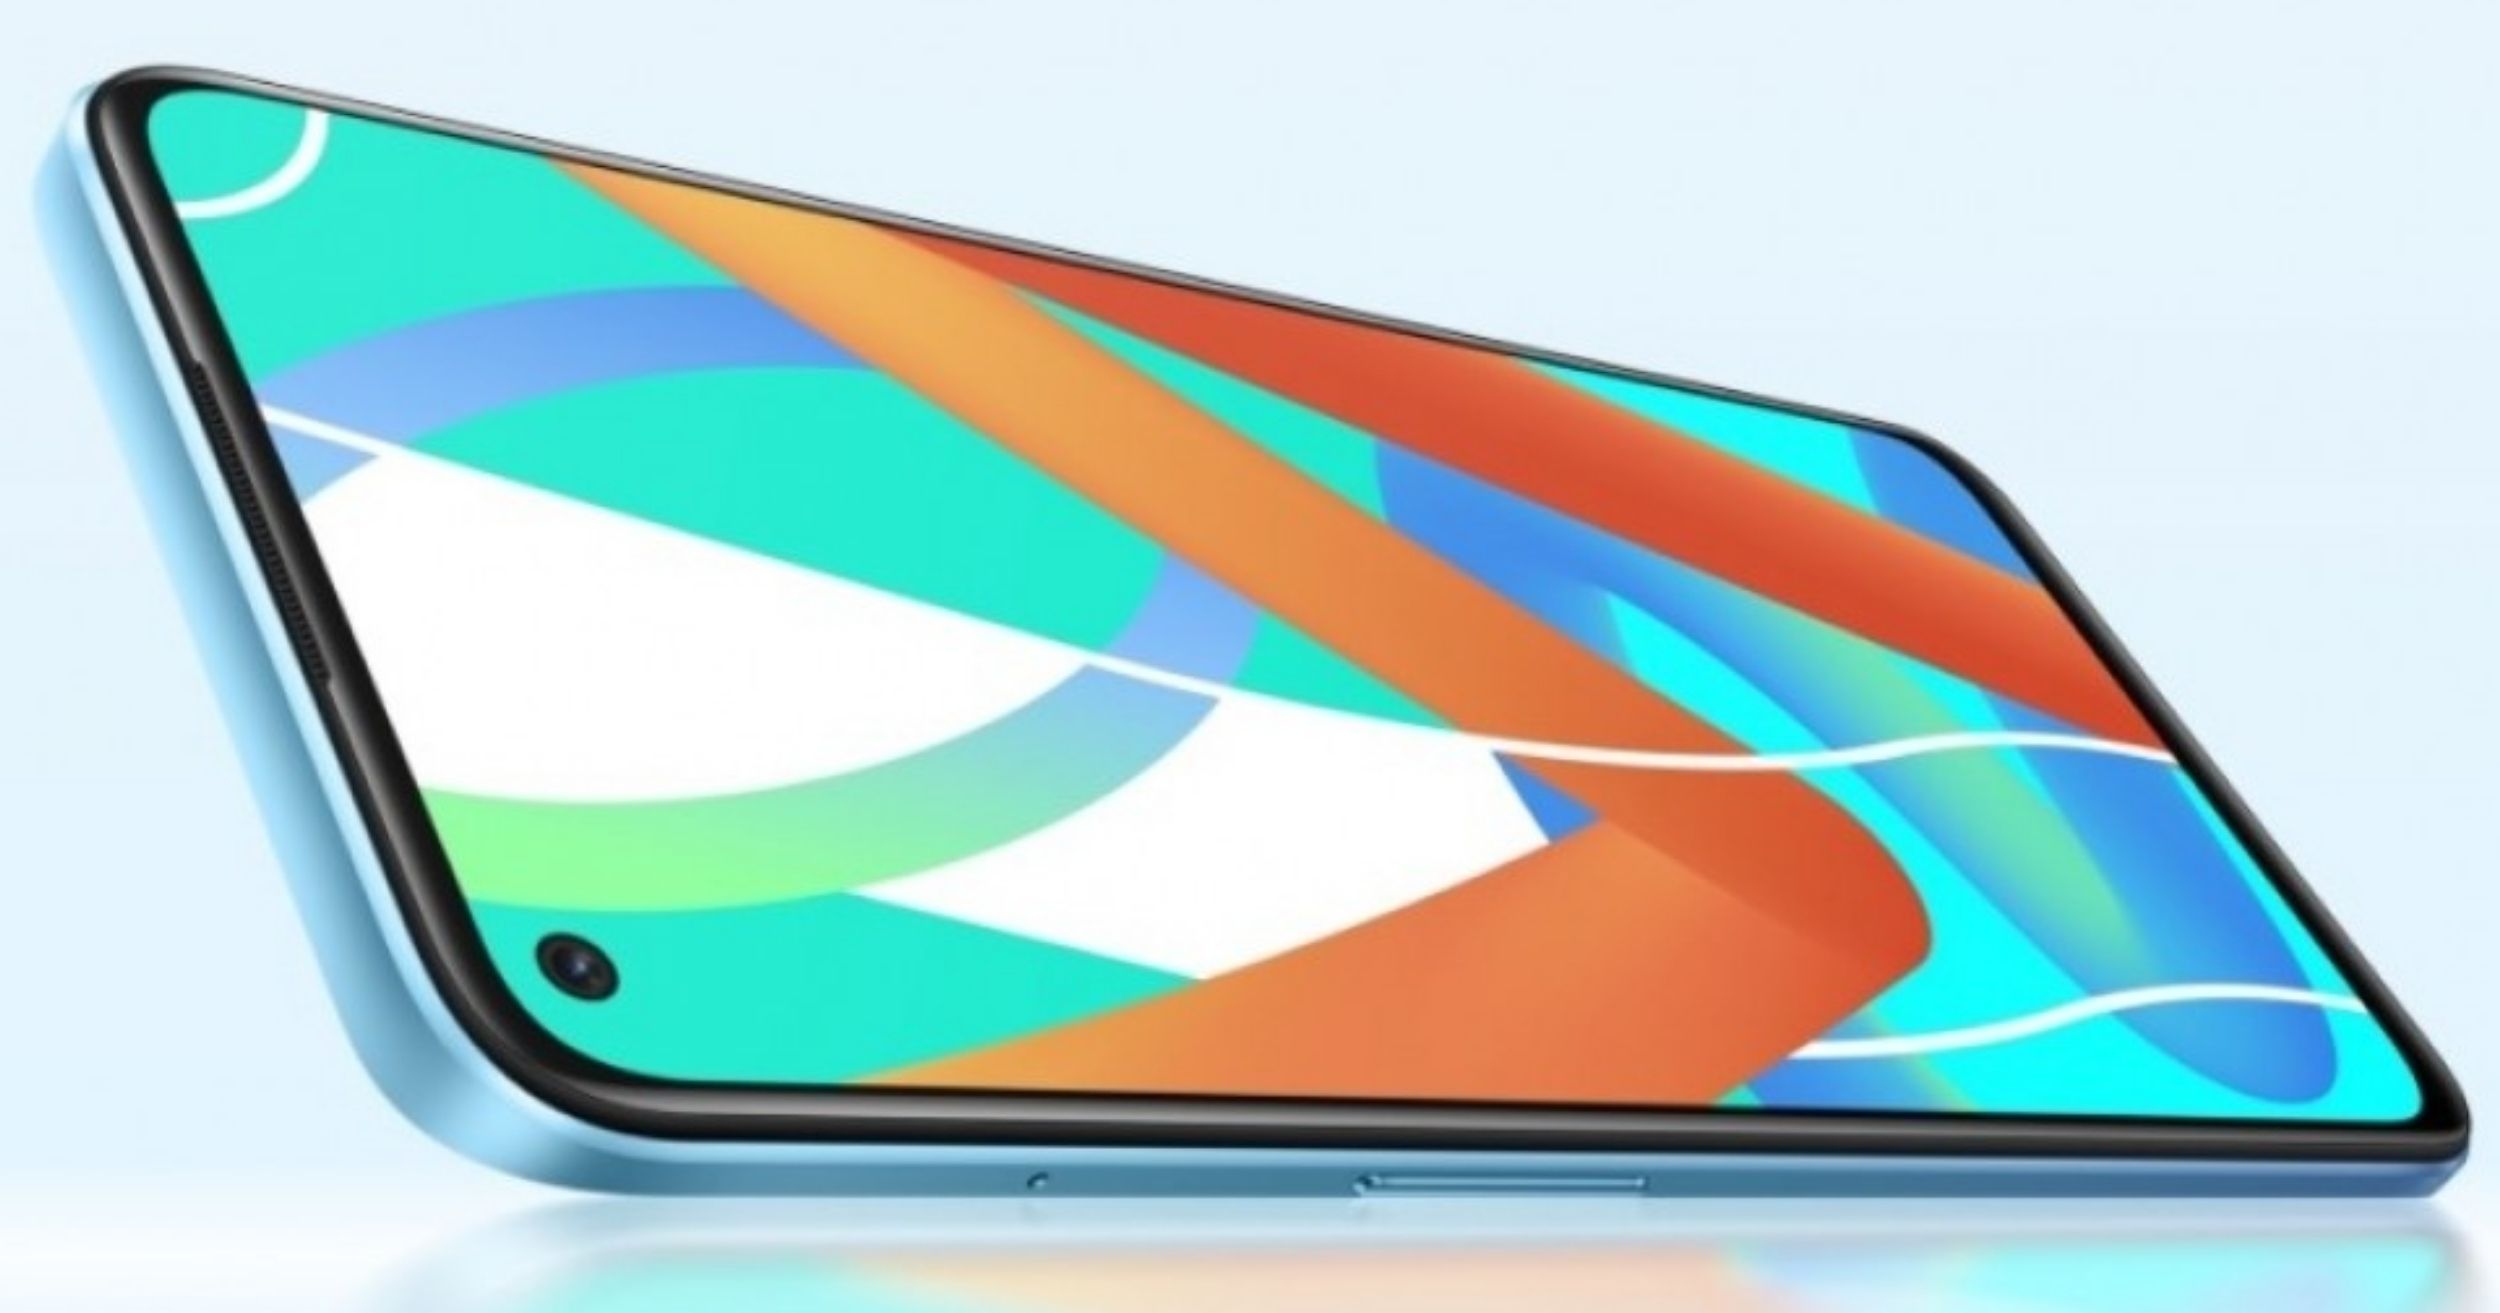 Realme V13 5G features 6.5” LCD FHD+, Dimensity 700 5G, and 5,000mAh